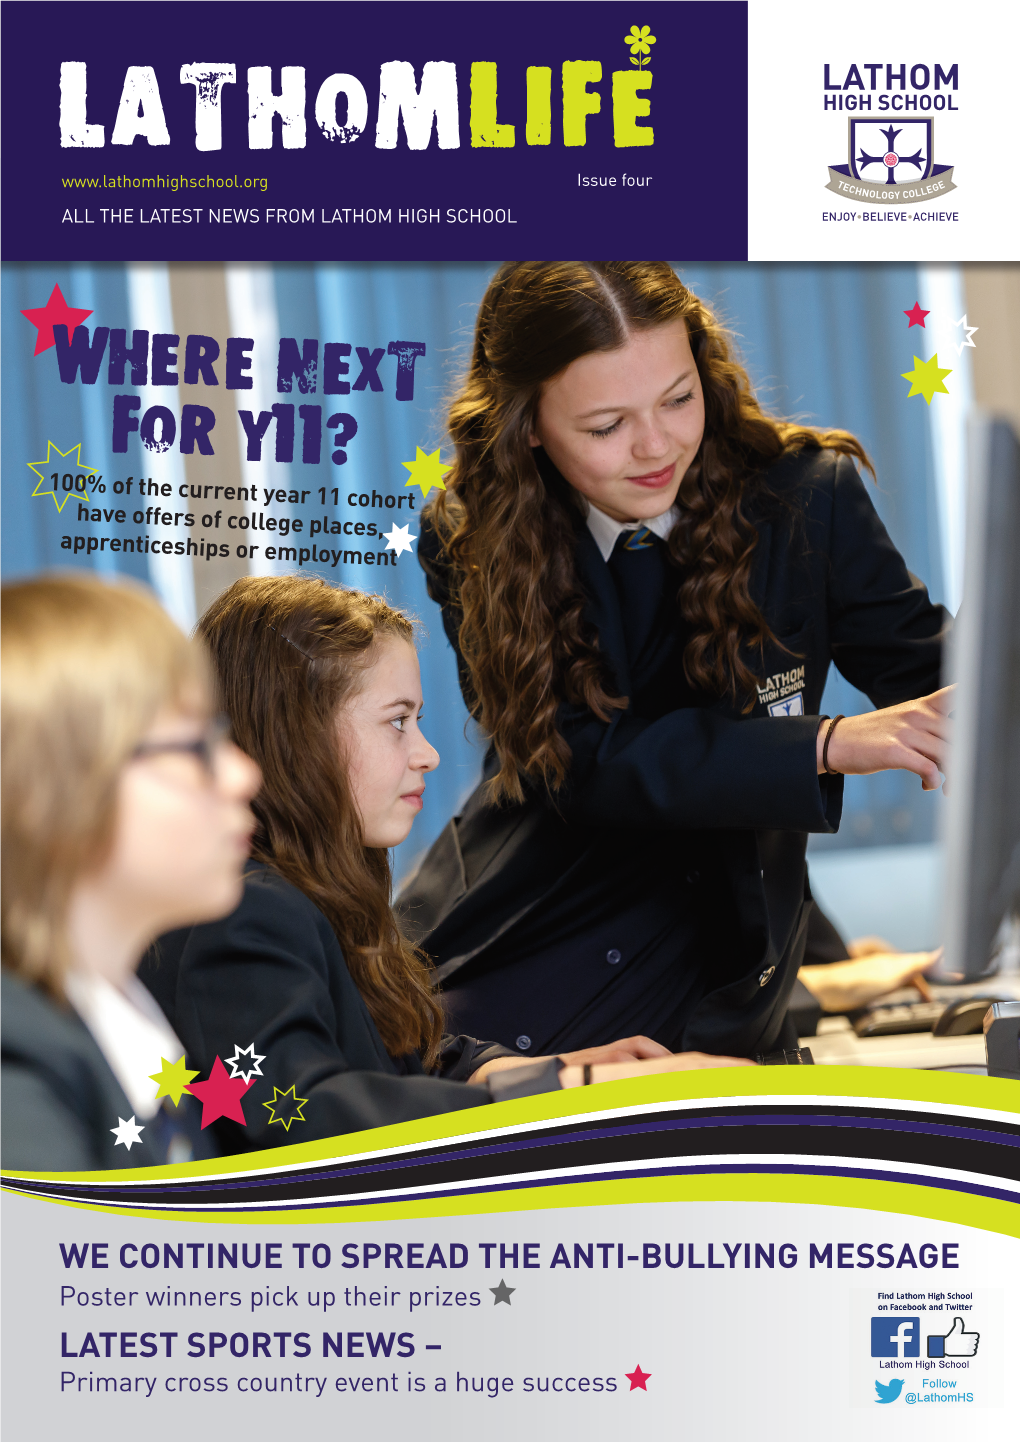 WHERE NEXT for Y11? 100% of the Current Year 11 Cohort Have Offers of College Places, Apprenticeships Or Employment